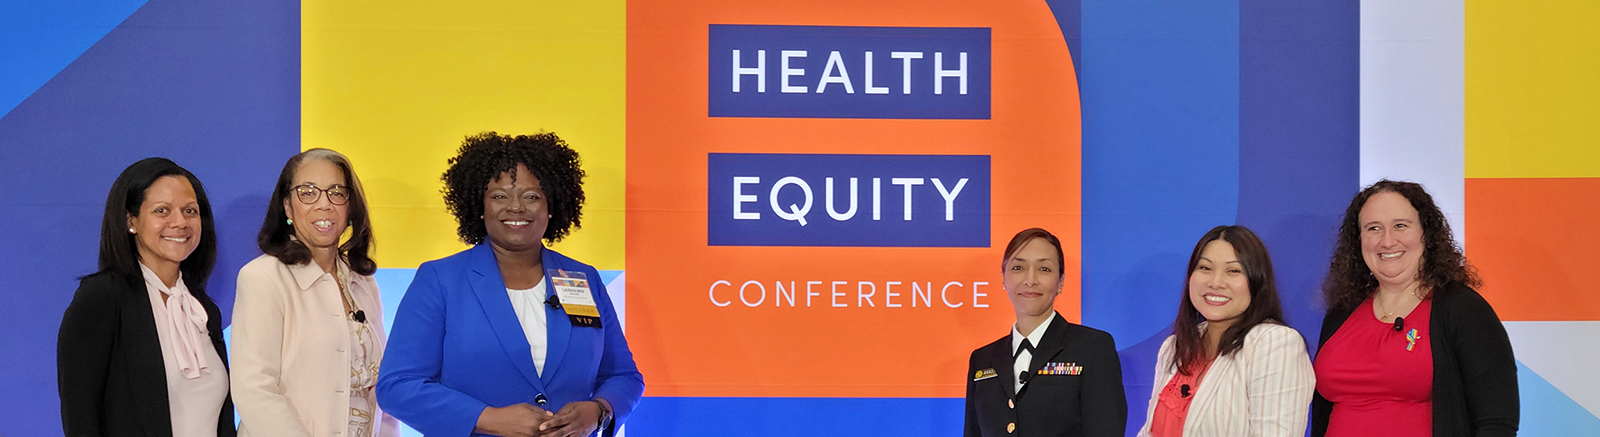 Six conference members posing in front of a Health Equity Conference wall